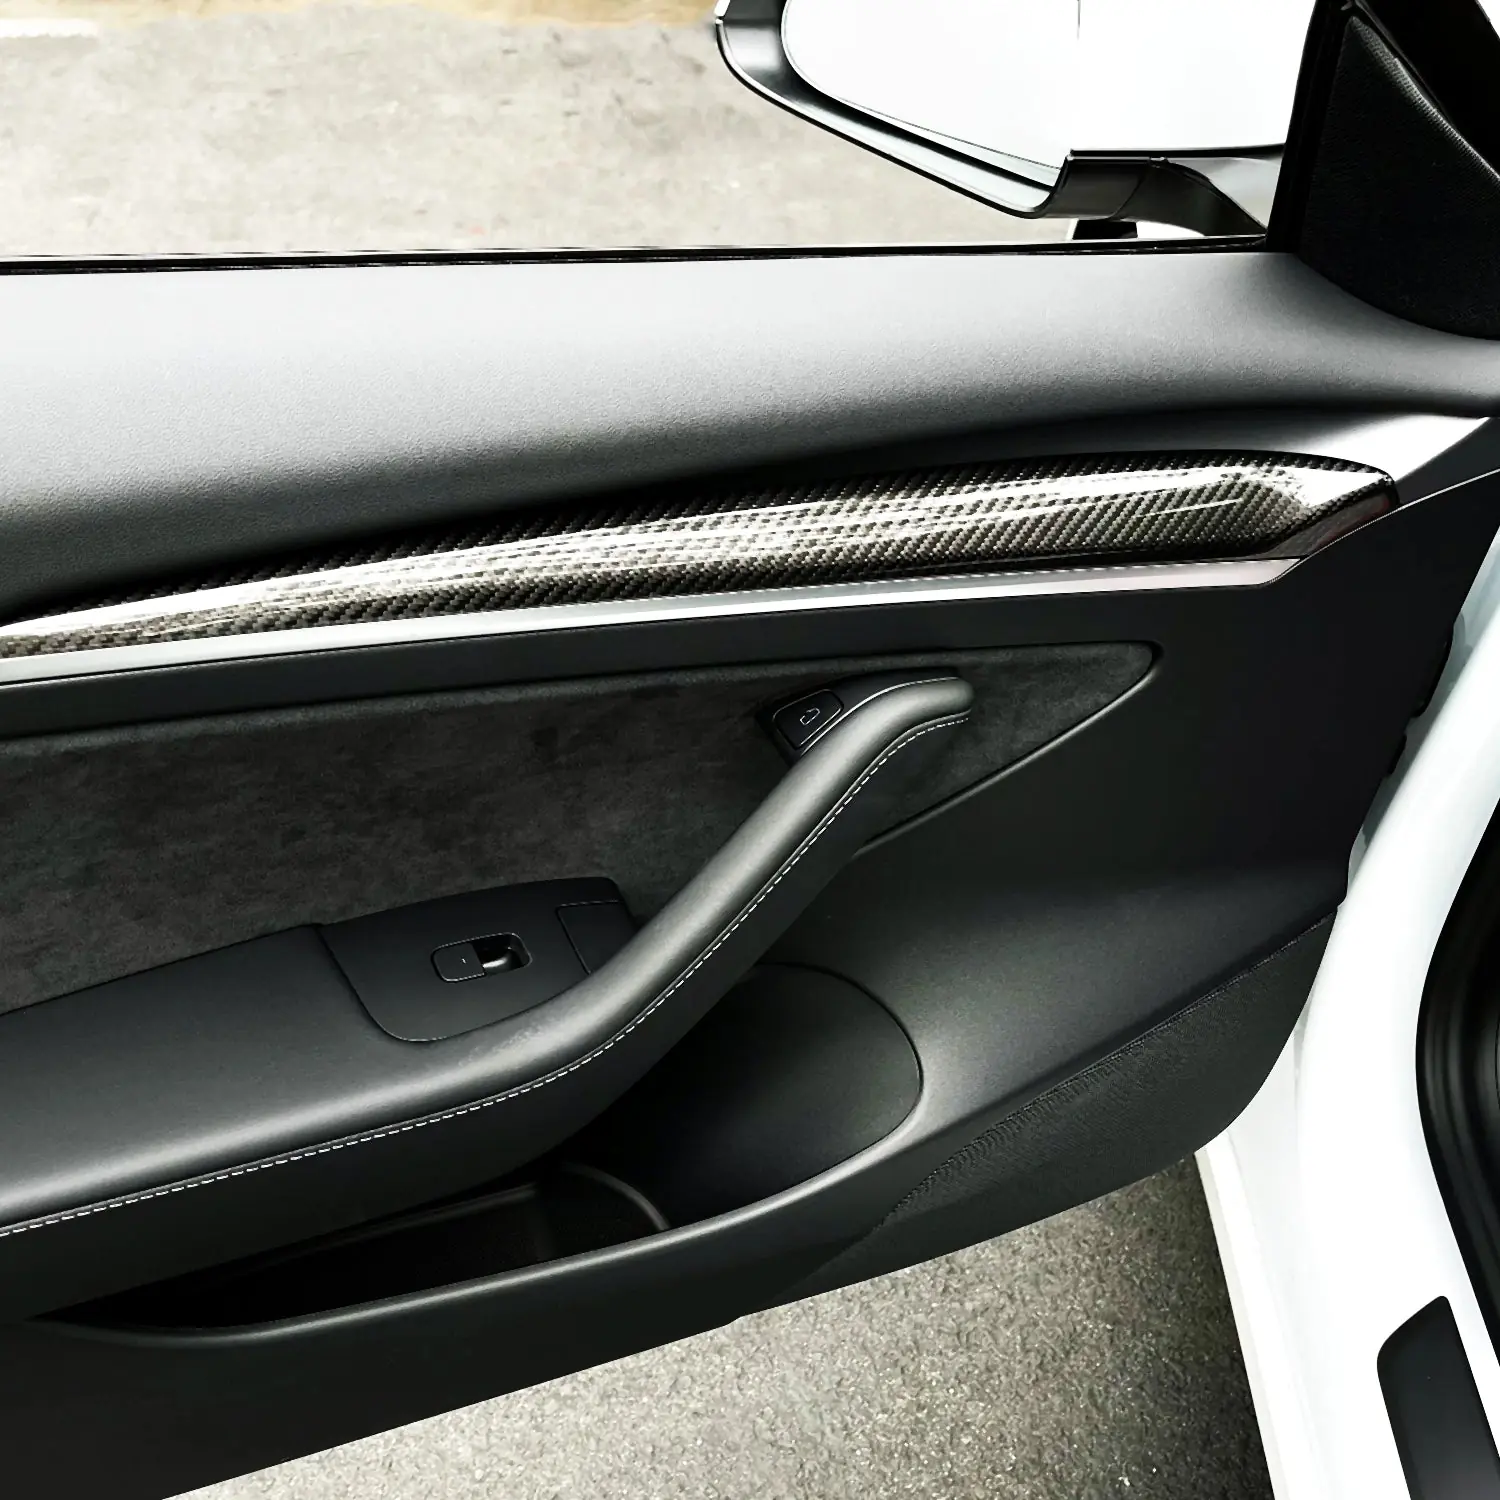 Adreama Tesla Model 3 Year 2021+ Real Dry Carbon Fiber Interior Door Trim Cover (2 pcs) (Ships Within 5-7 Days)